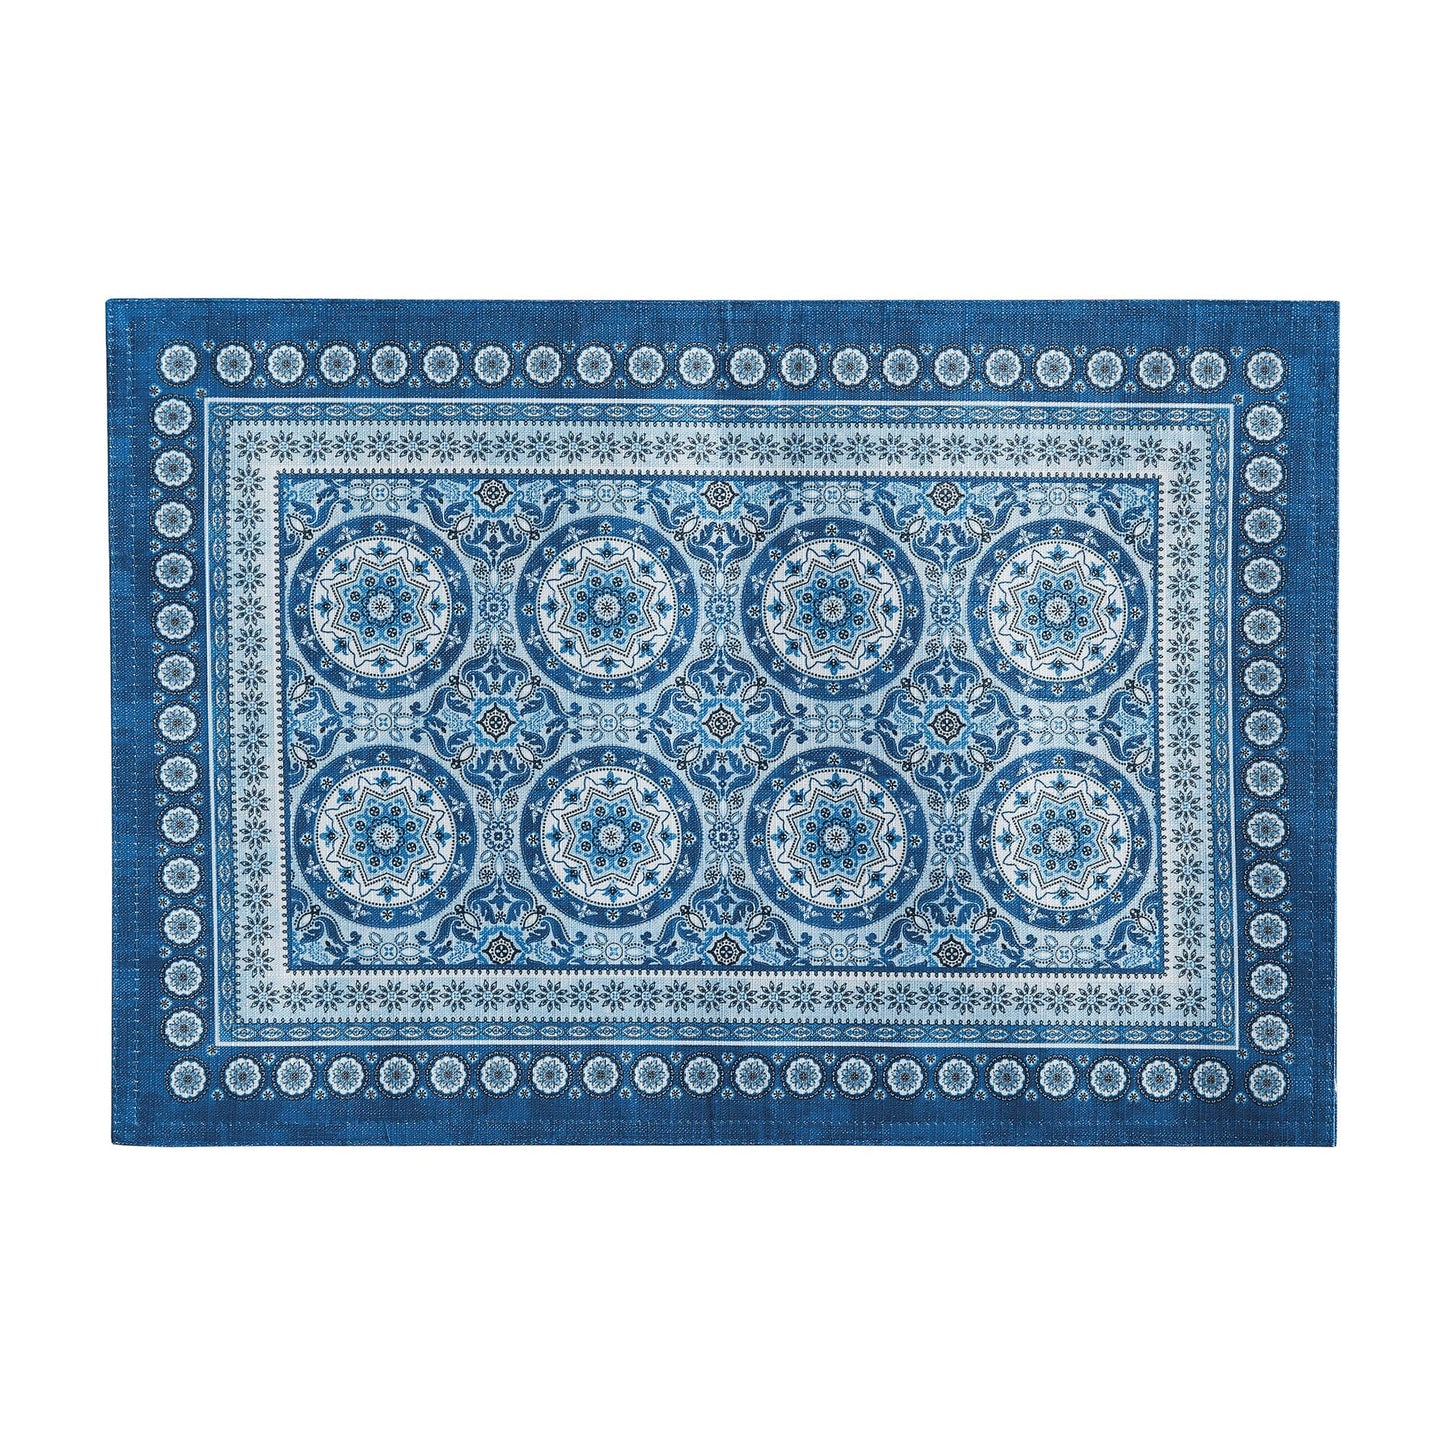 Vietri Medallion Block Print Stain & Water Resistant Indoor/Outdoor Placemats, Set of 4